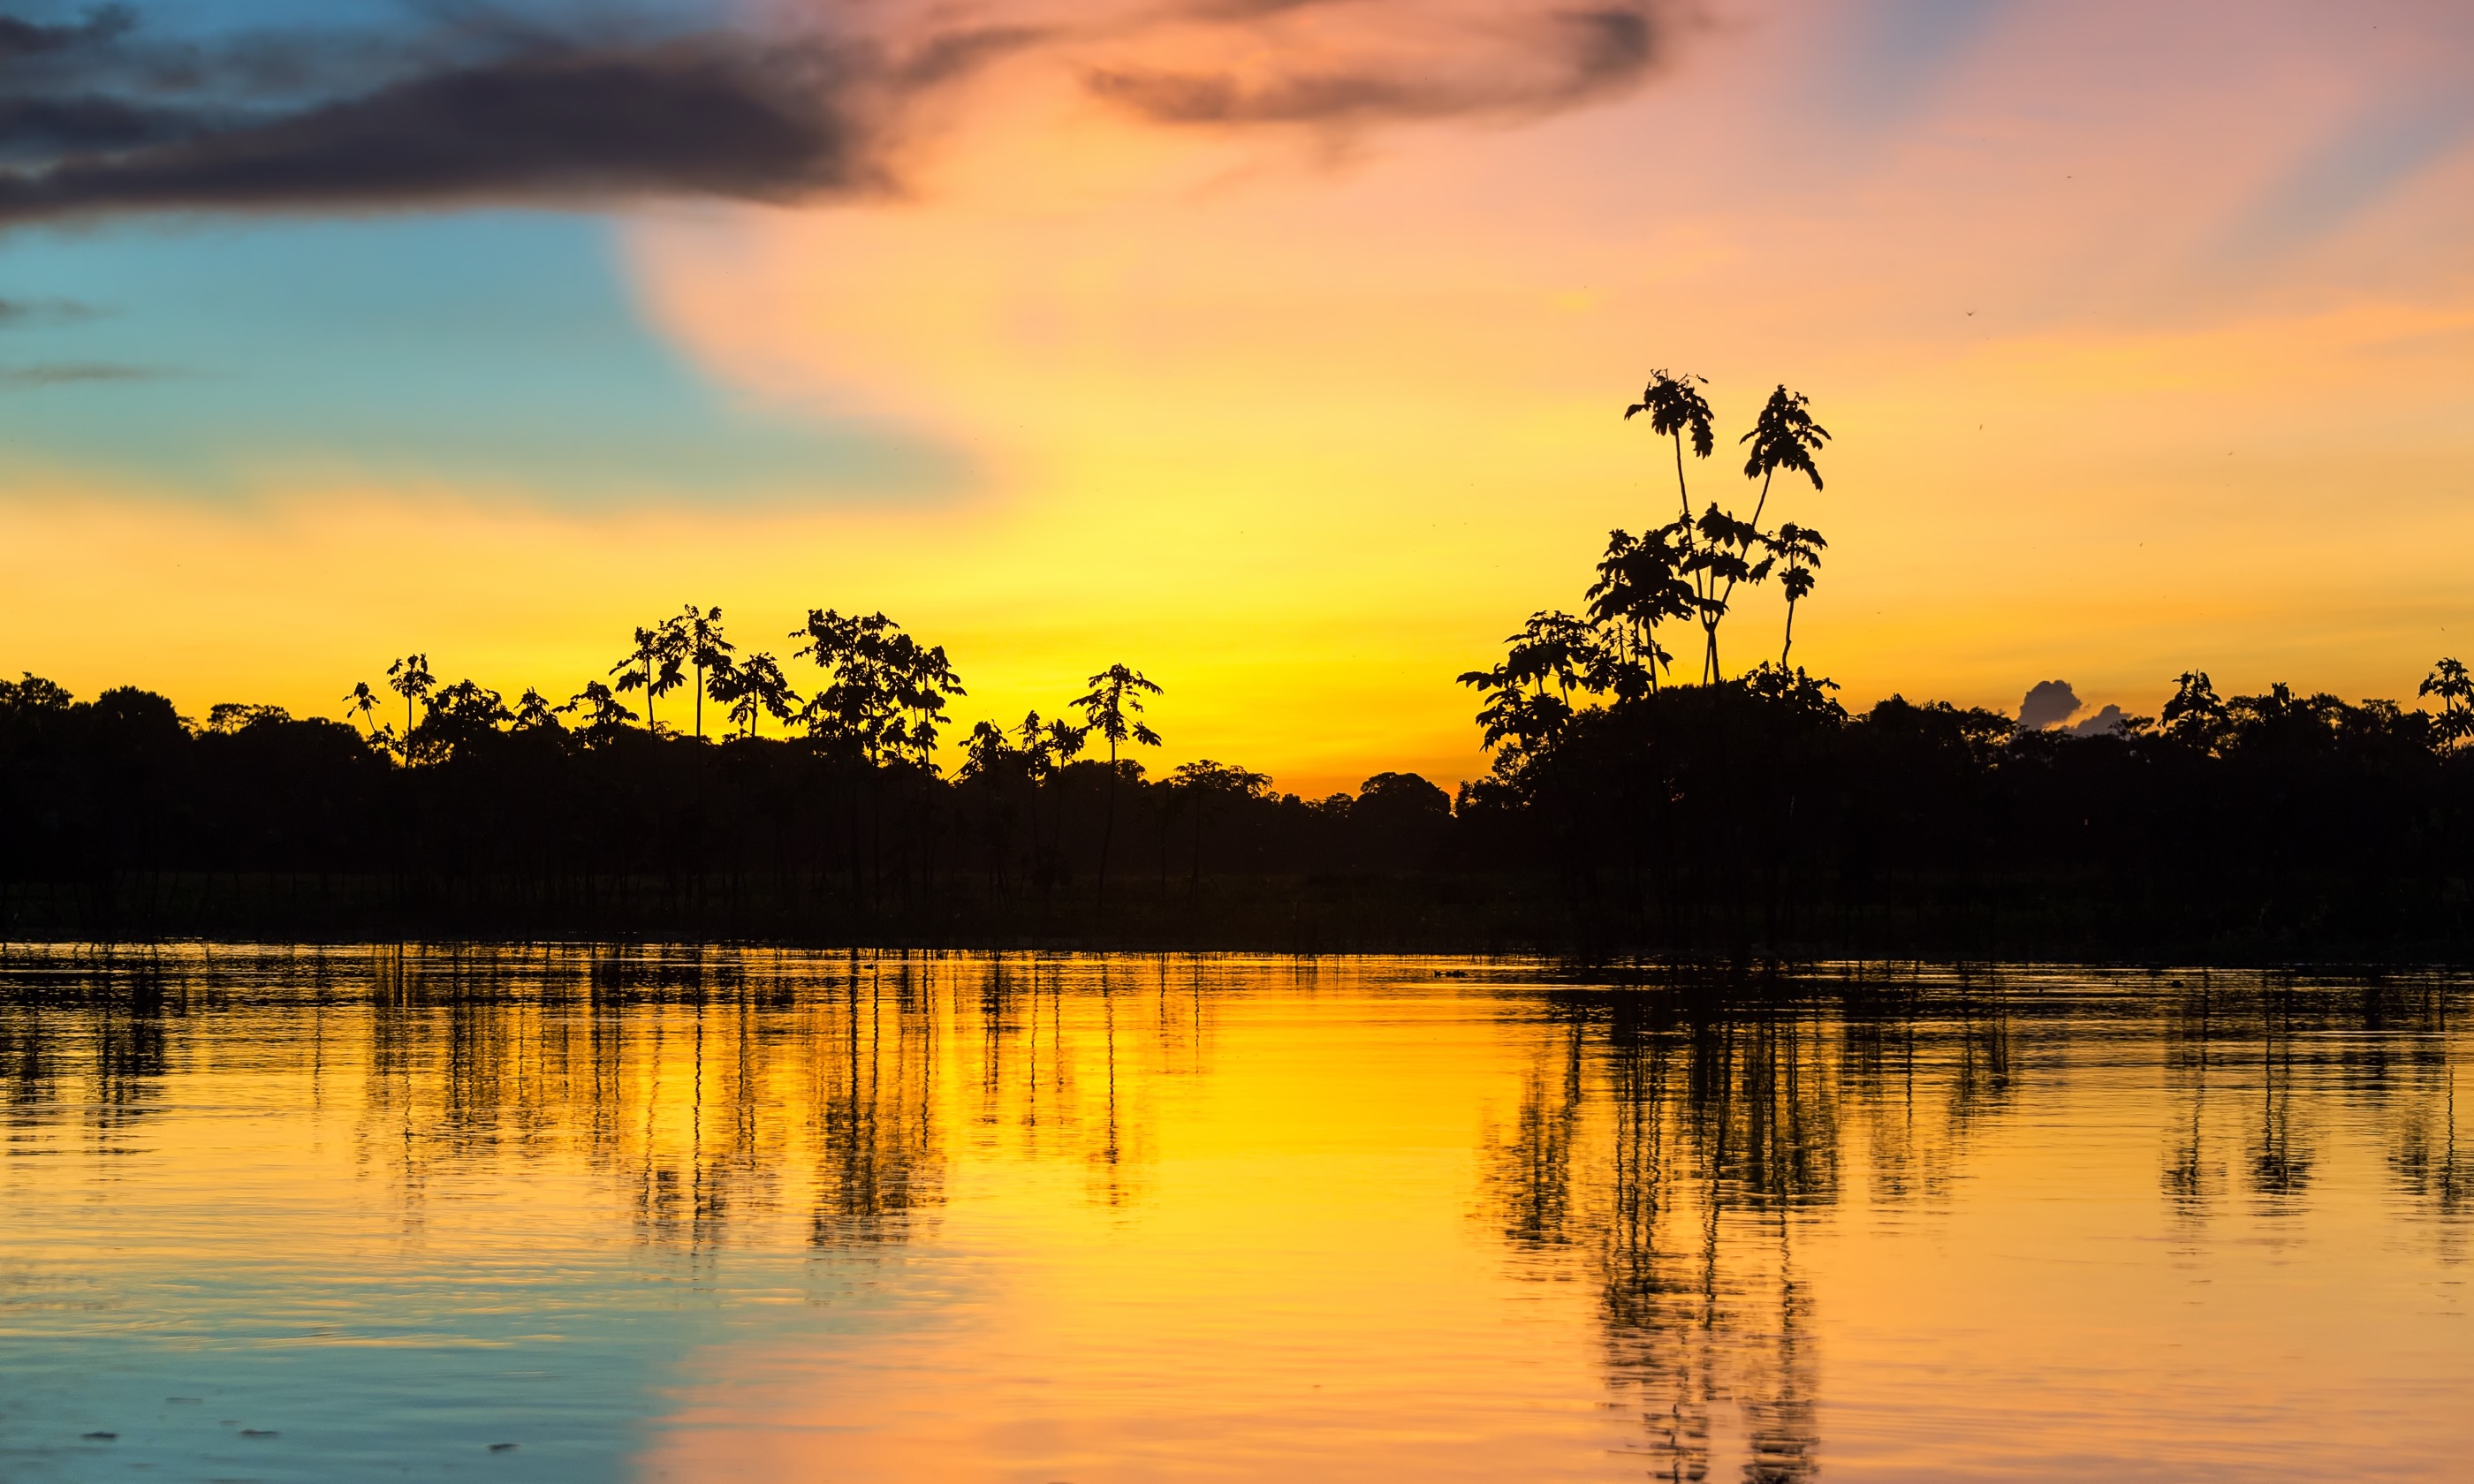 Sunset over the Amazon in Peru (Shutterstock.com. See main credit below)